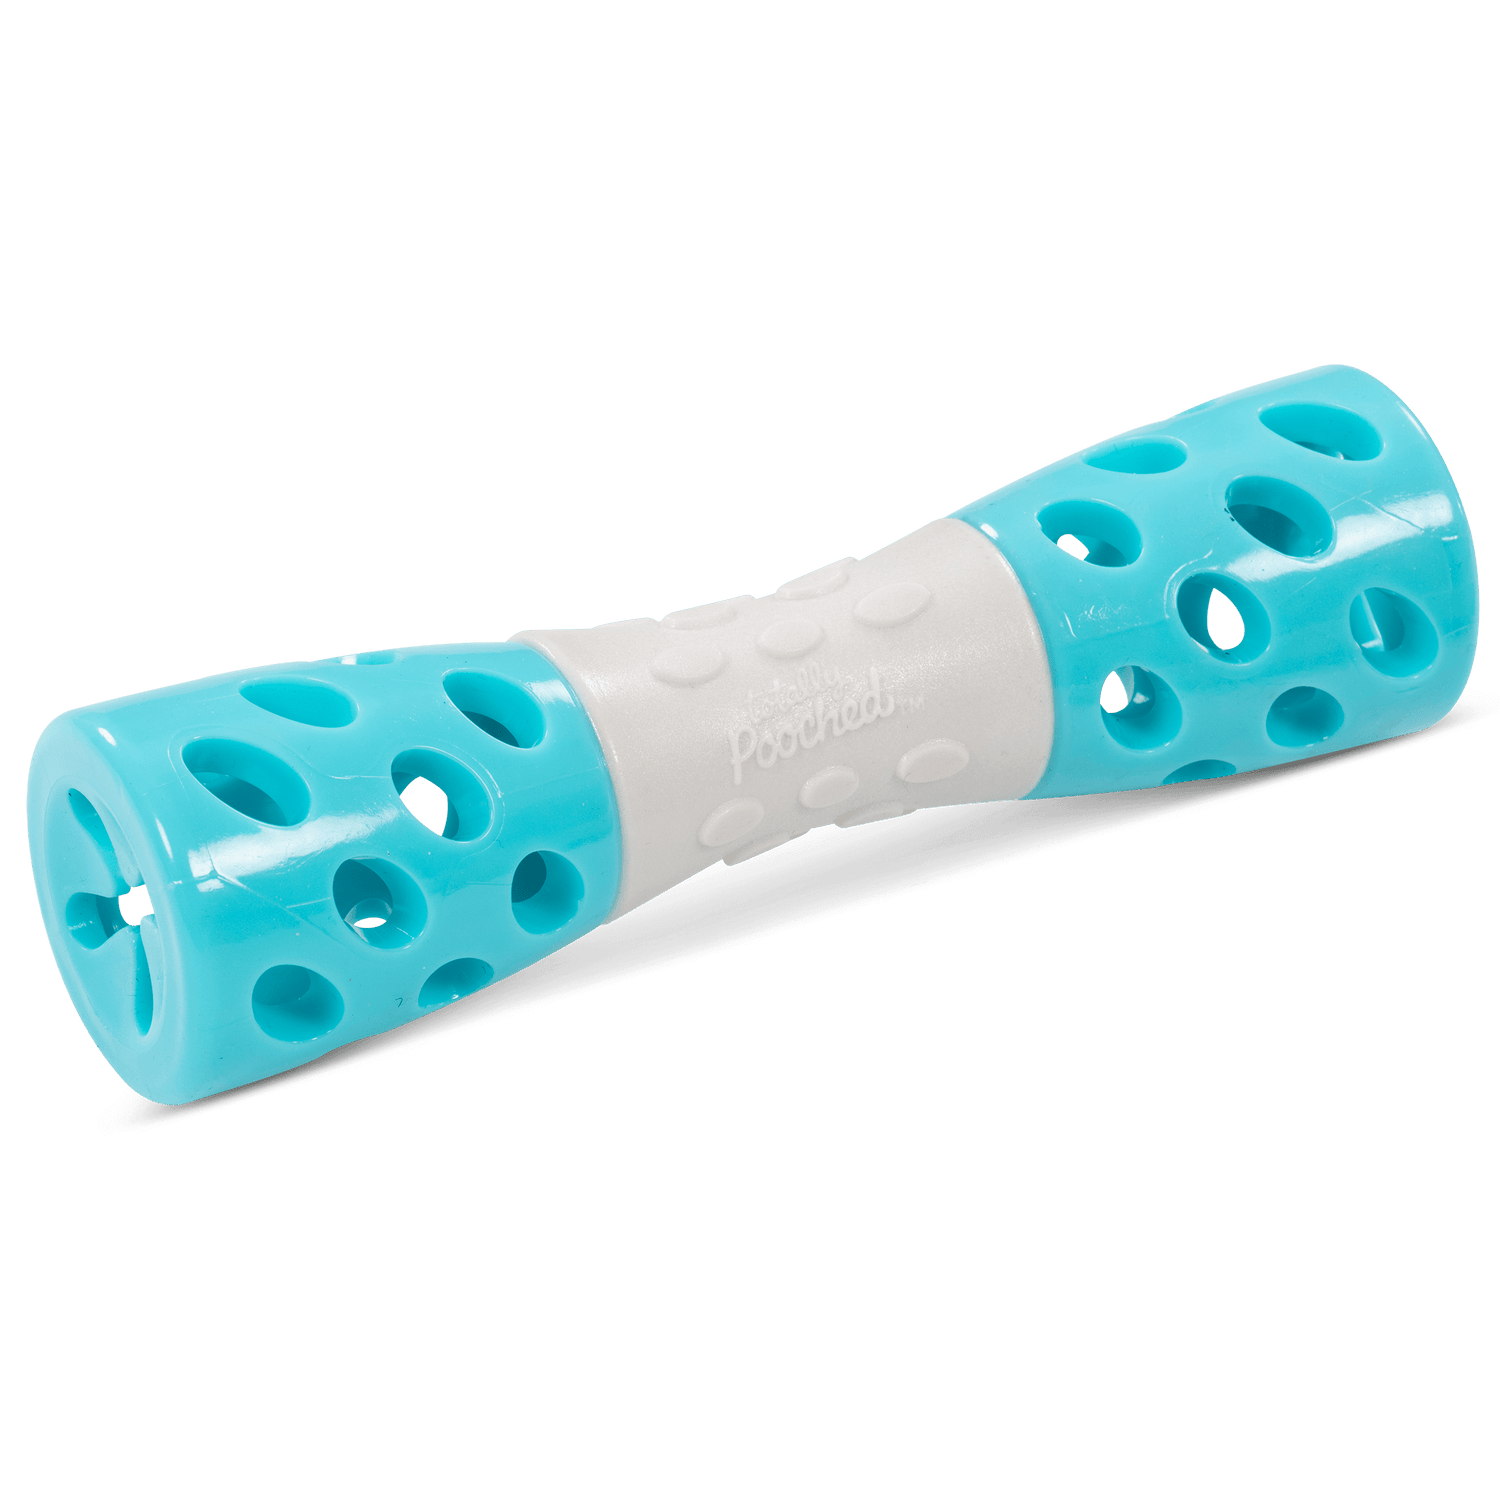 Teal and grey dog toy with integrated squeaker to excite your dog. 